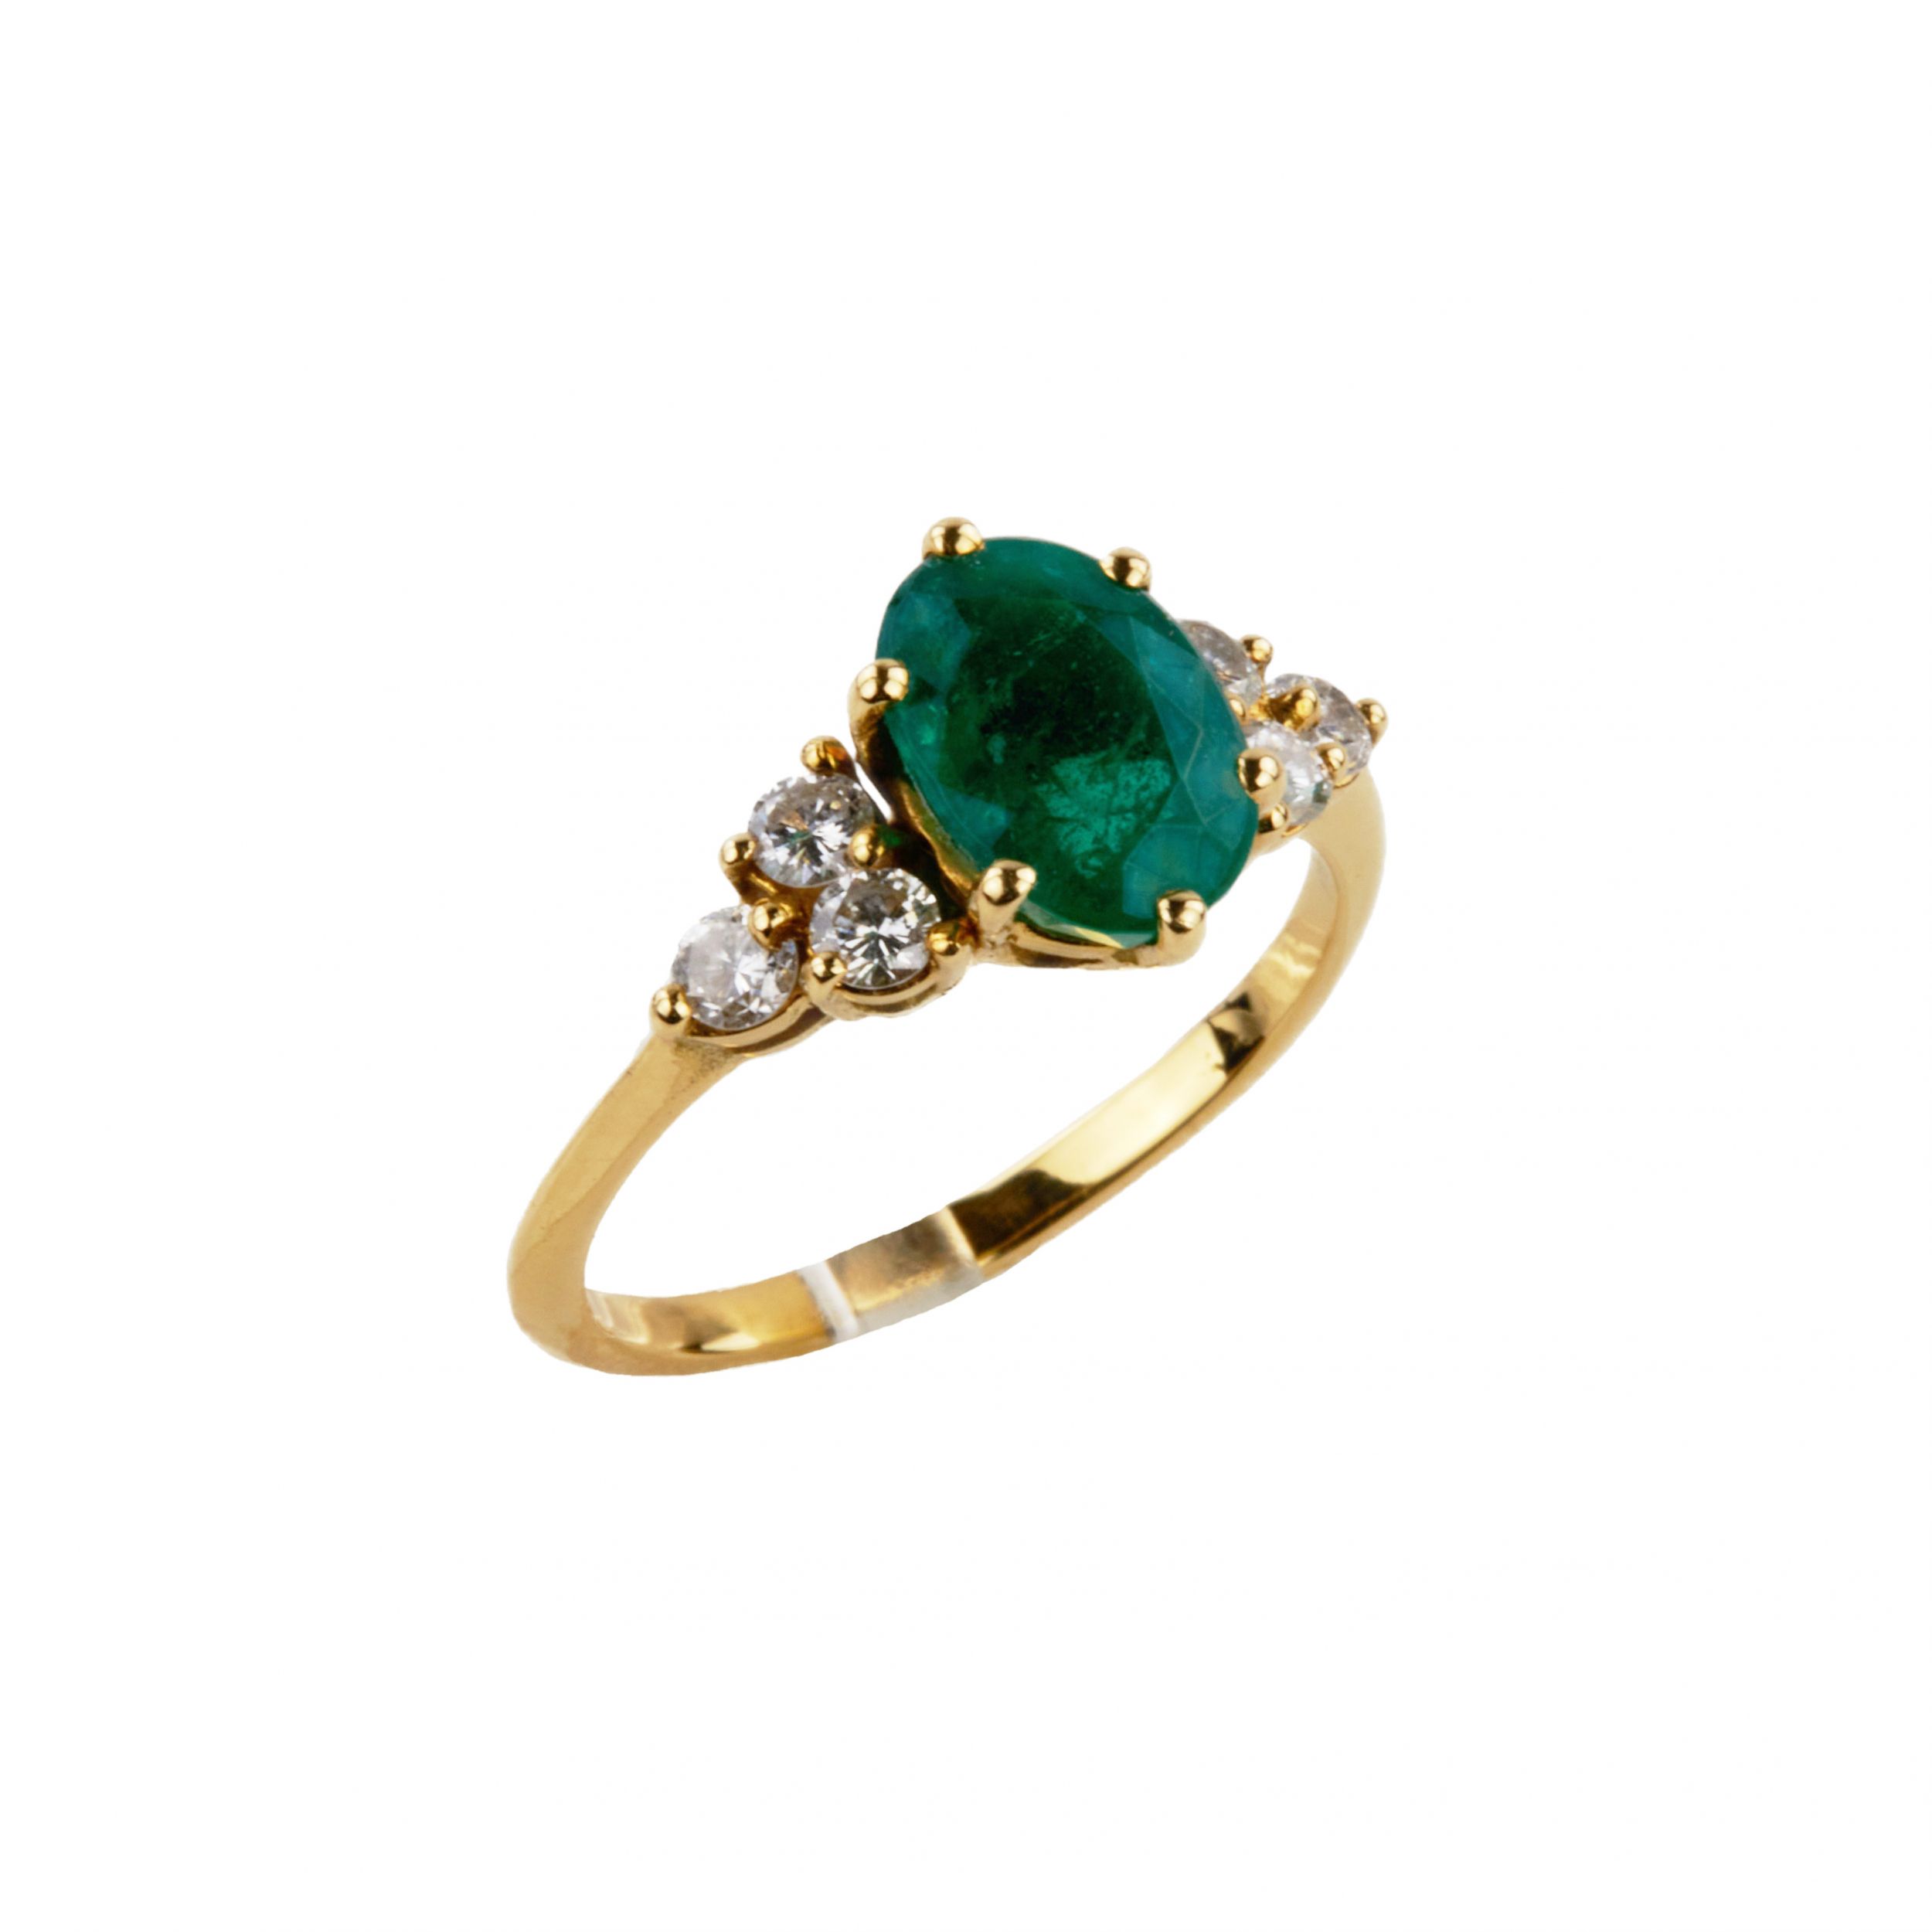 Gold ring with emerald and diamonds, classic design, total weight 3.10 gr. Colombian emerald 1.6 ct. - Image 2 of 5